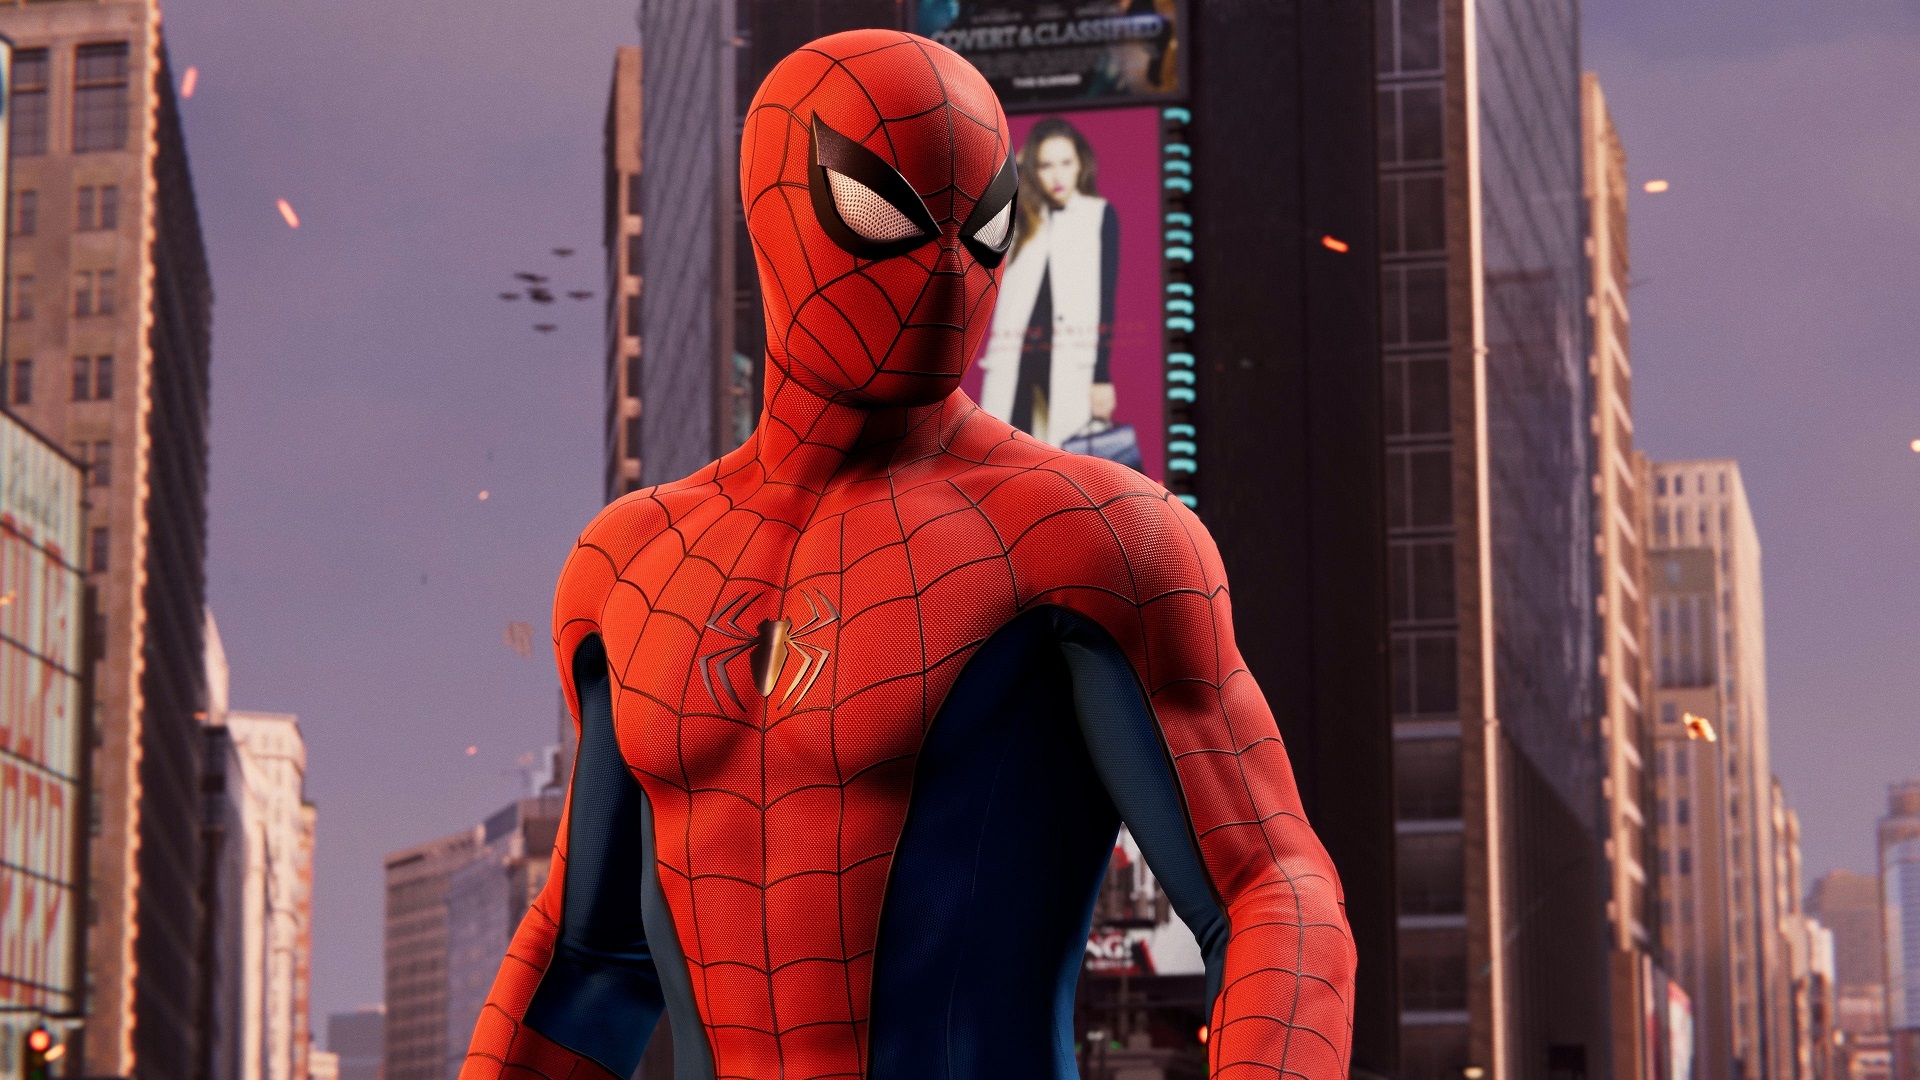 Spider-Man Remastered coming to PC in August, Spider-Man: Miles Morales in fall 2022